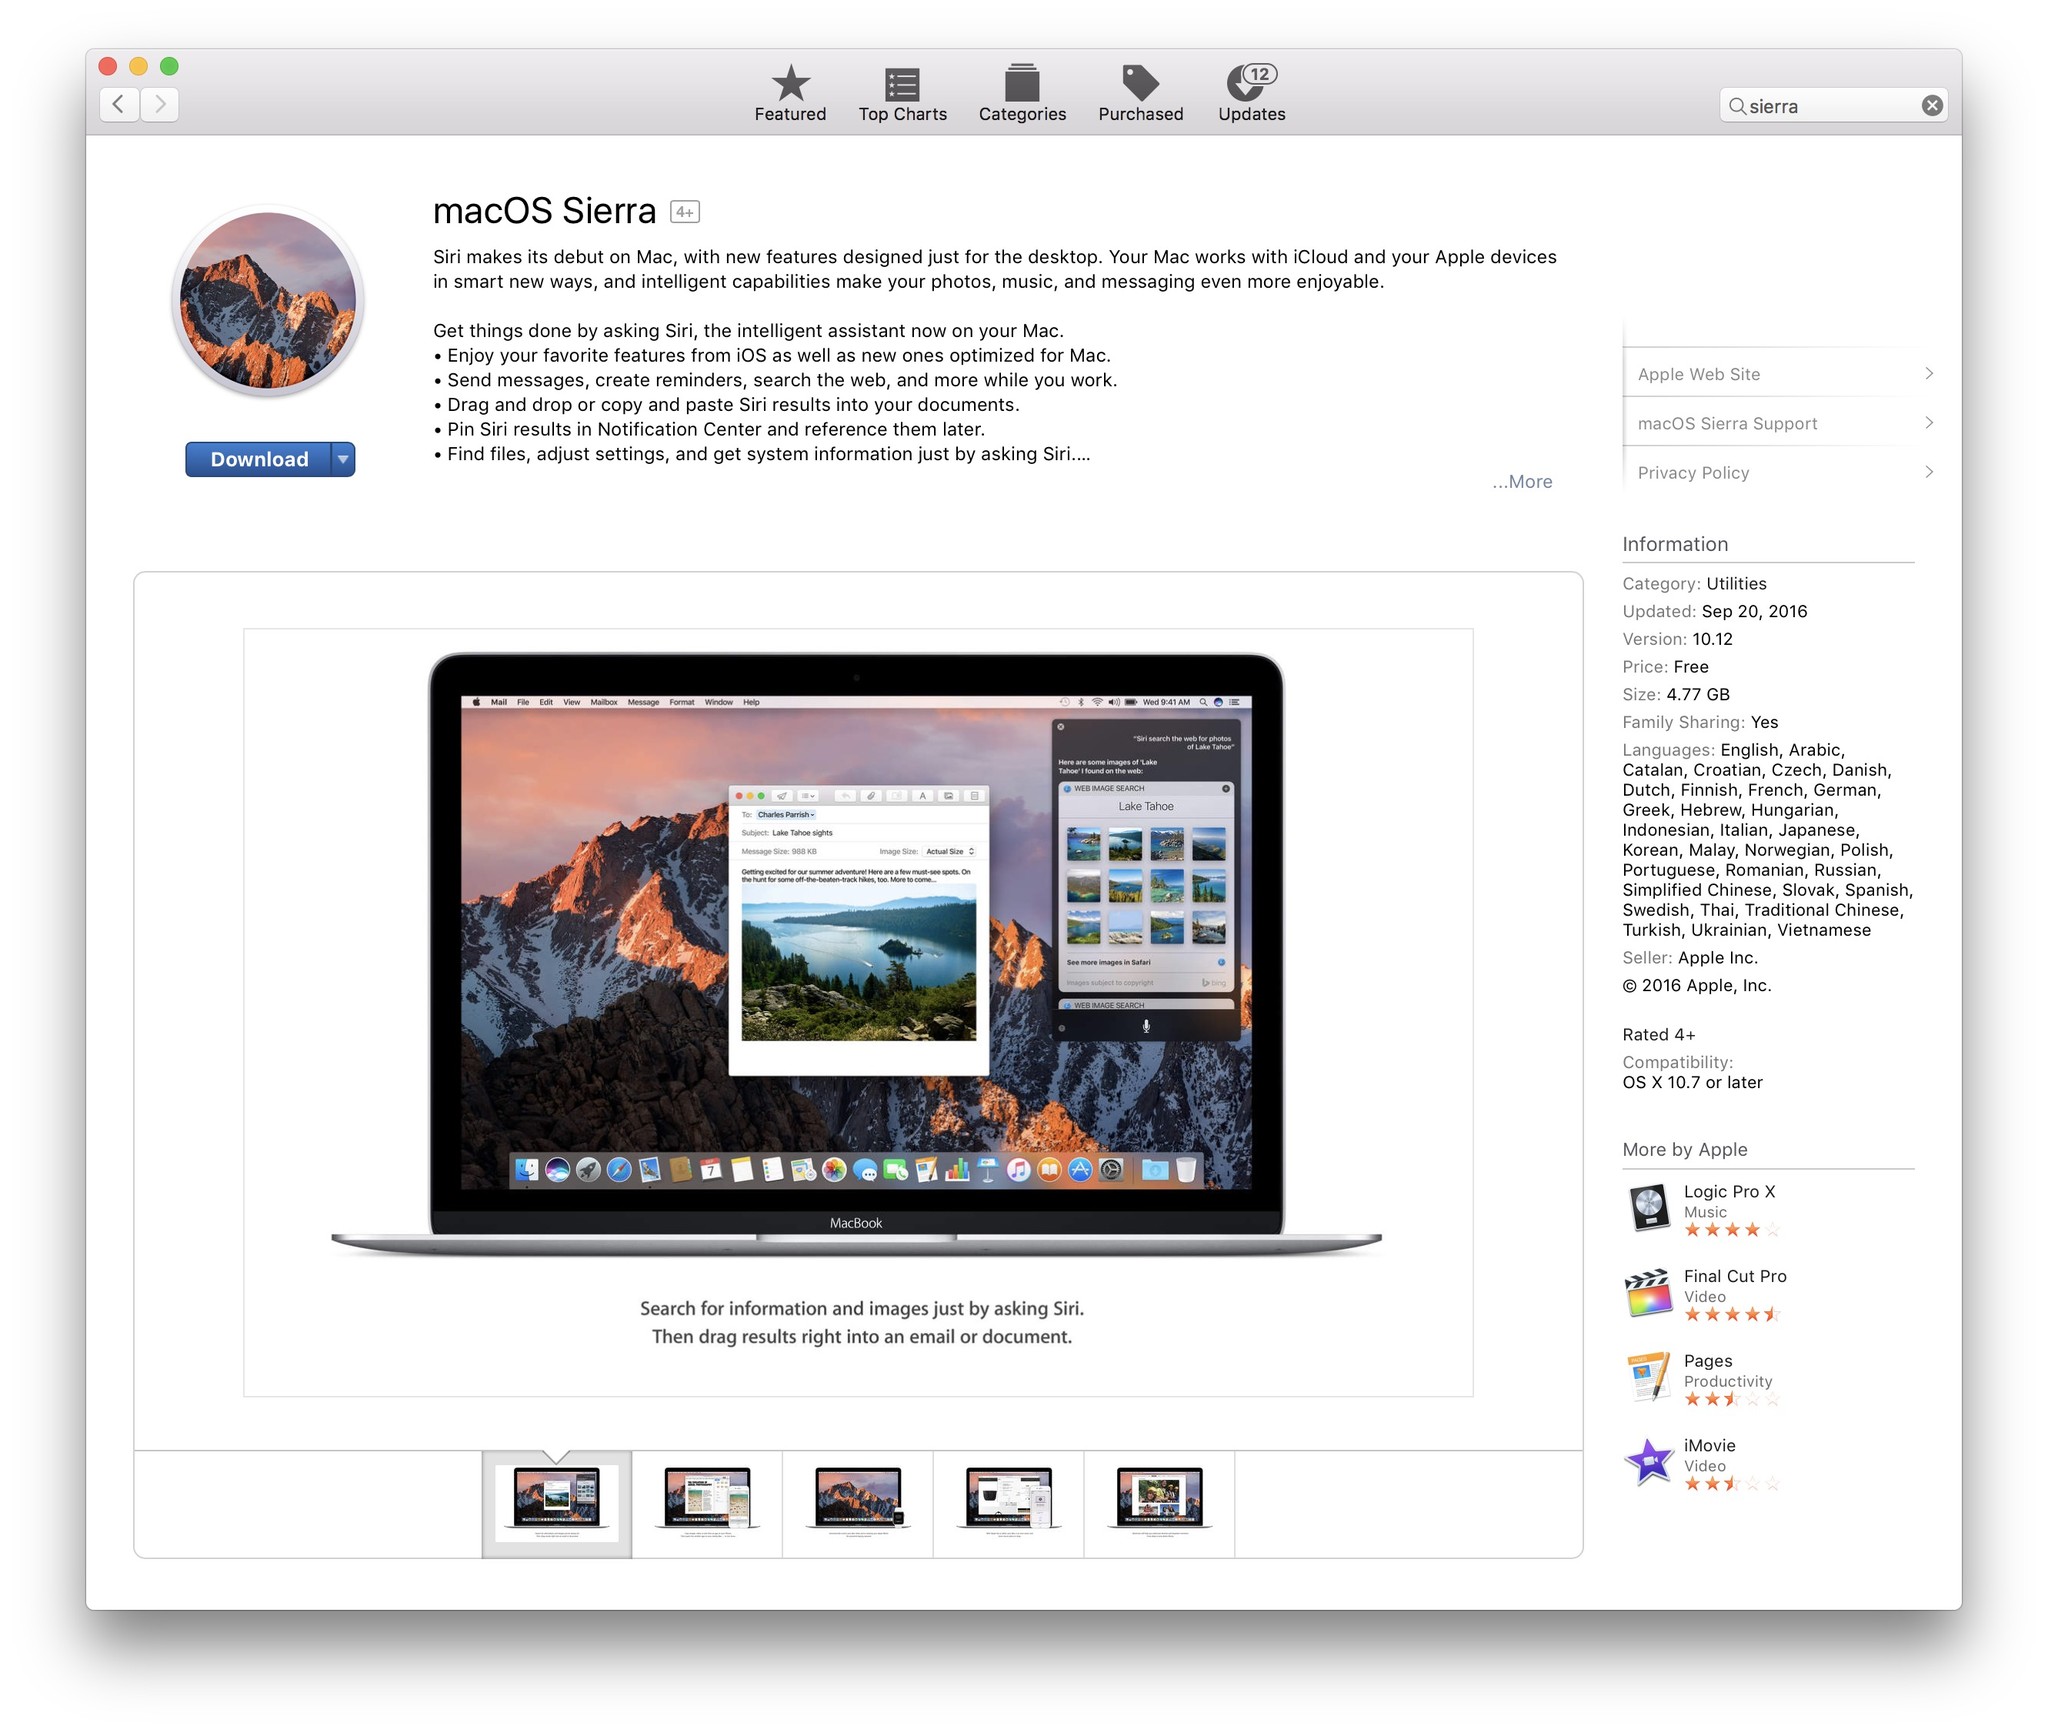 How to upgrade to macOS Sierra from El Capitan, Yosemite 